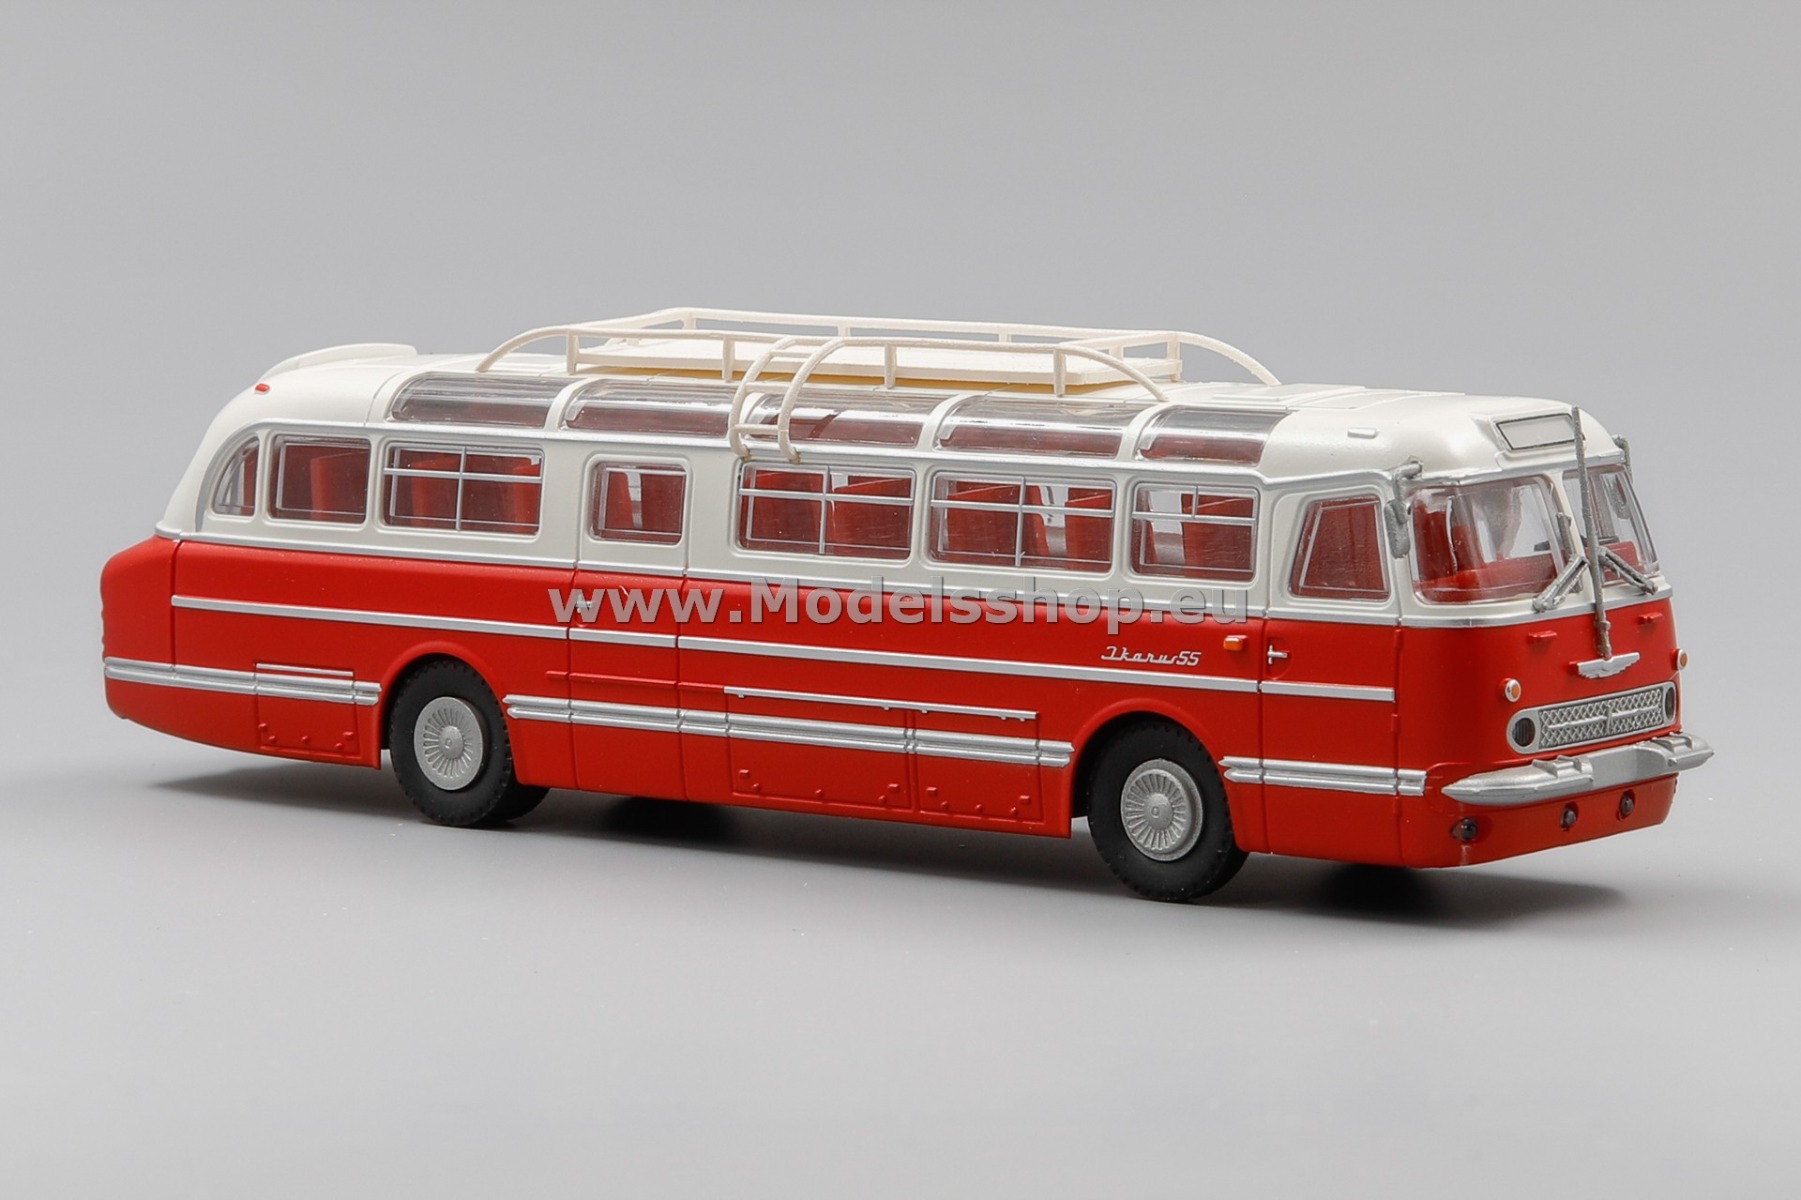 Ikarus 55 overland bus, 1968 /white - red/